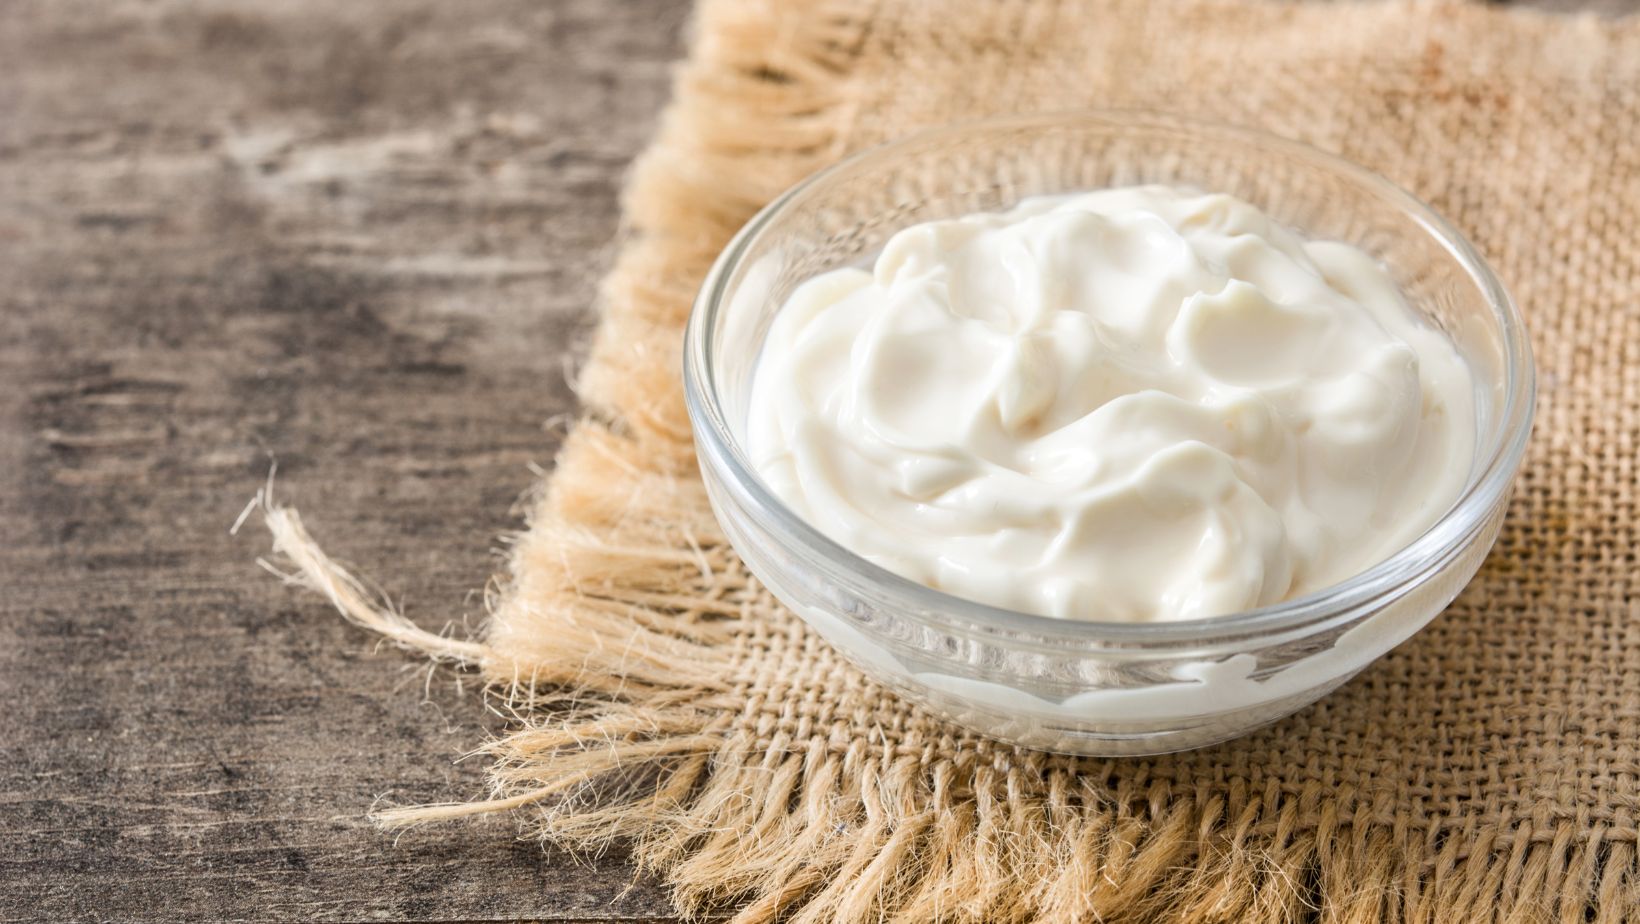 is sour cream good for keto